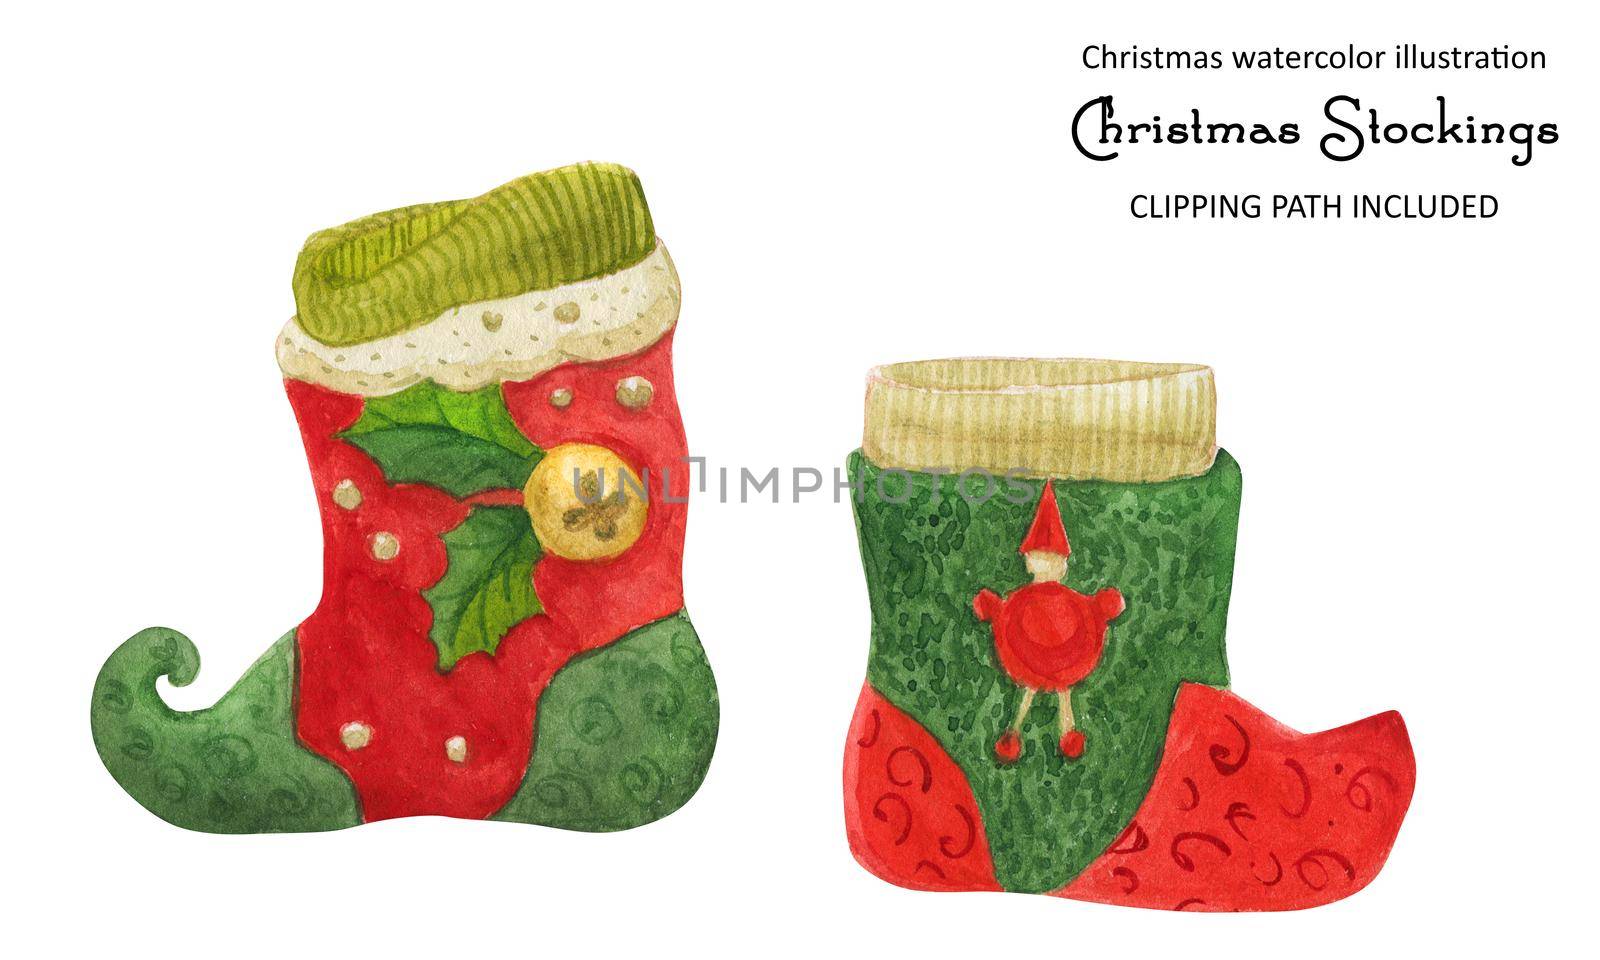 Christmas stockings, watercolor illustration with clipping path